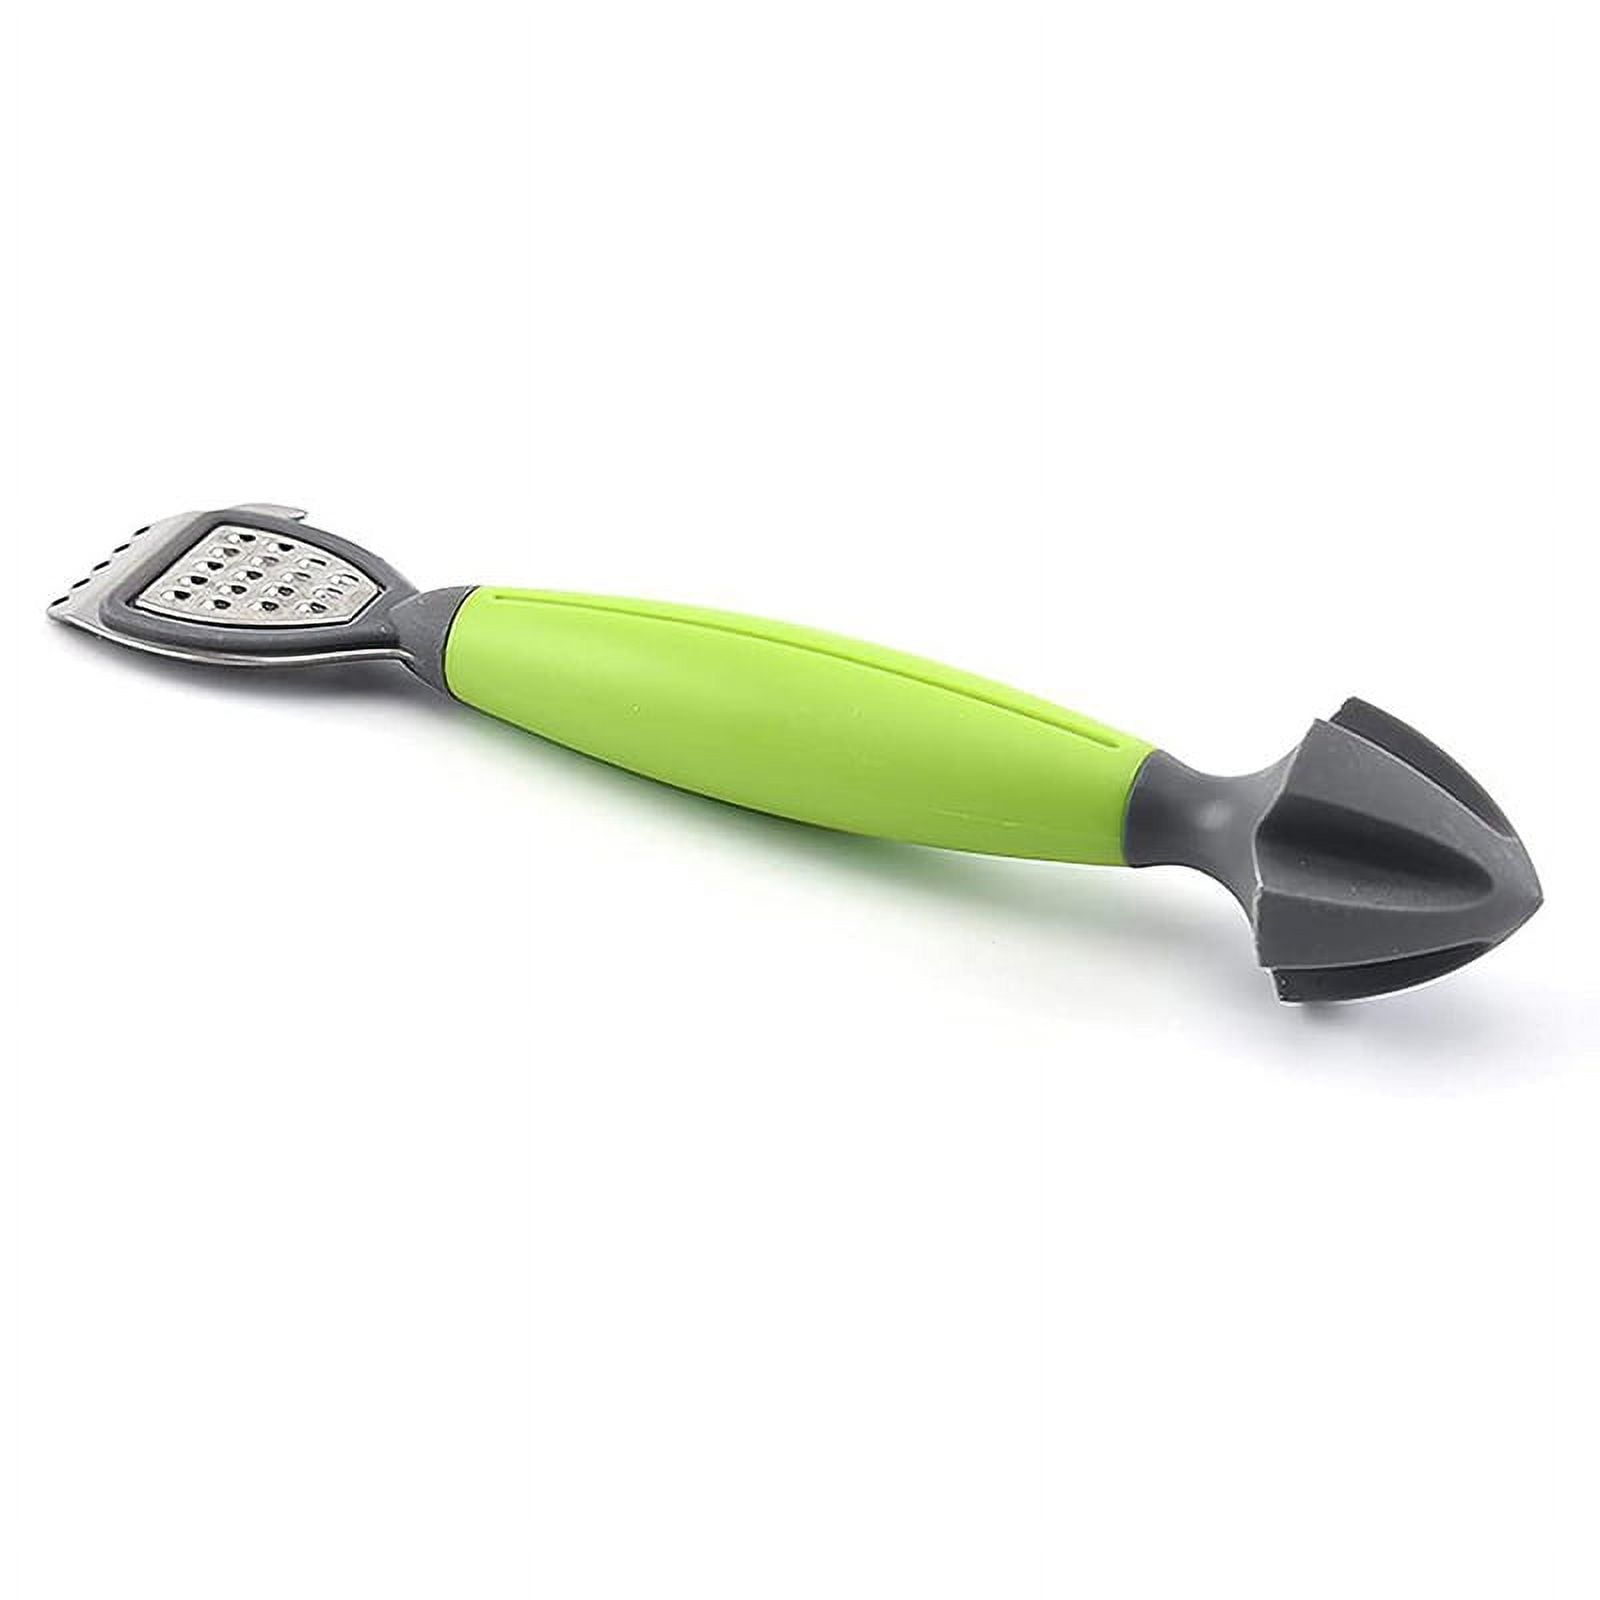  Integrity Chef PRO Citrus Zester and Cheese Grater